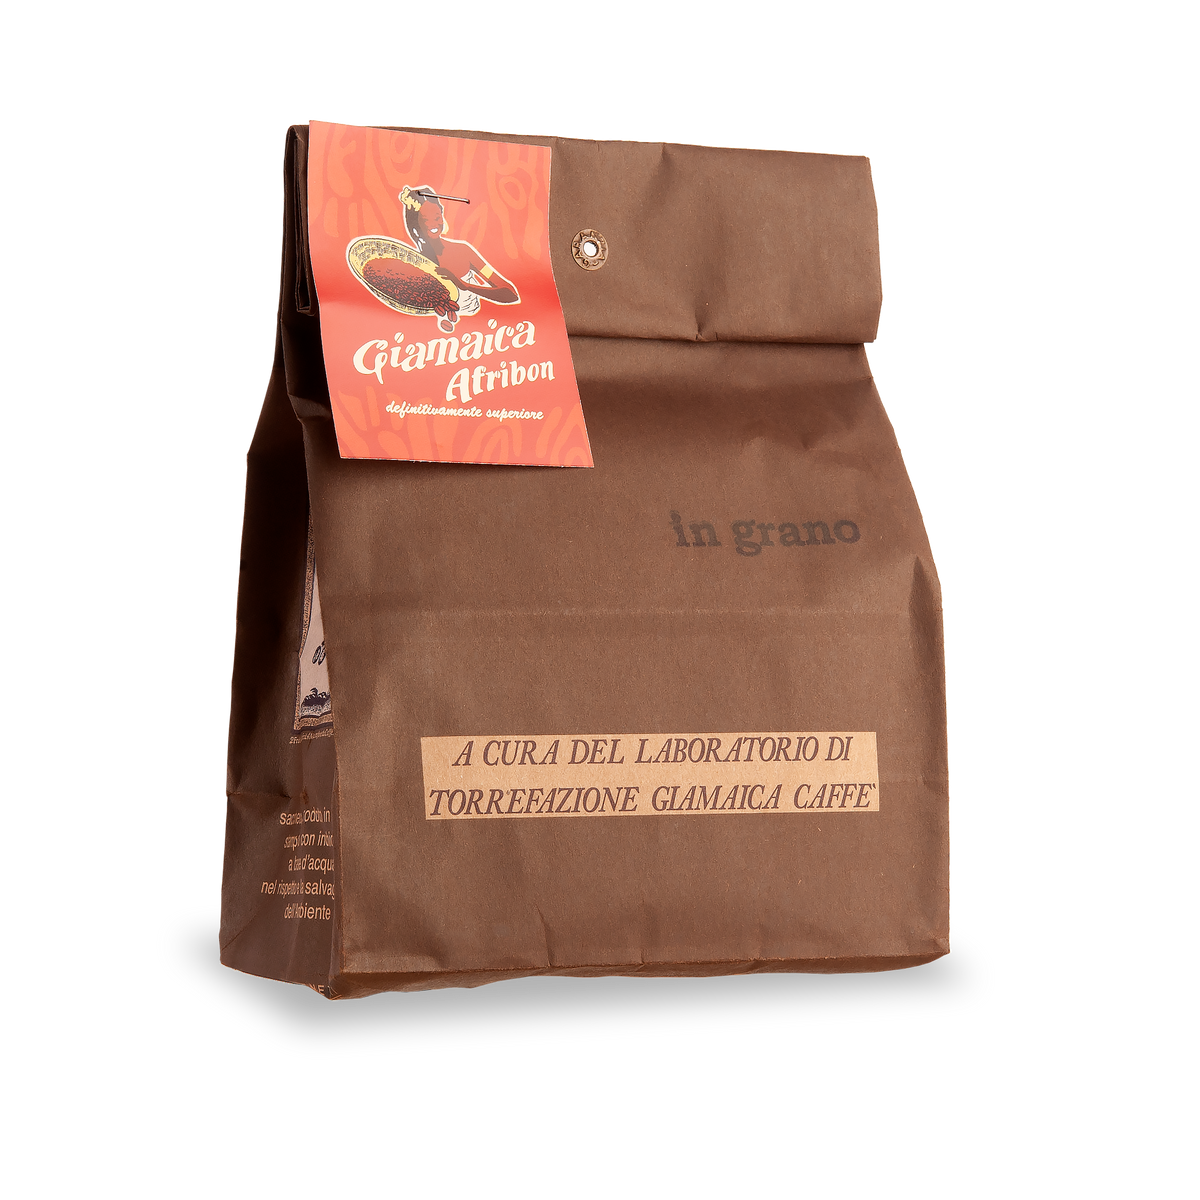 Coffee Afribon 1kg - PRE-ORDER - Contact us for further information (indulge@flemmings.wine)